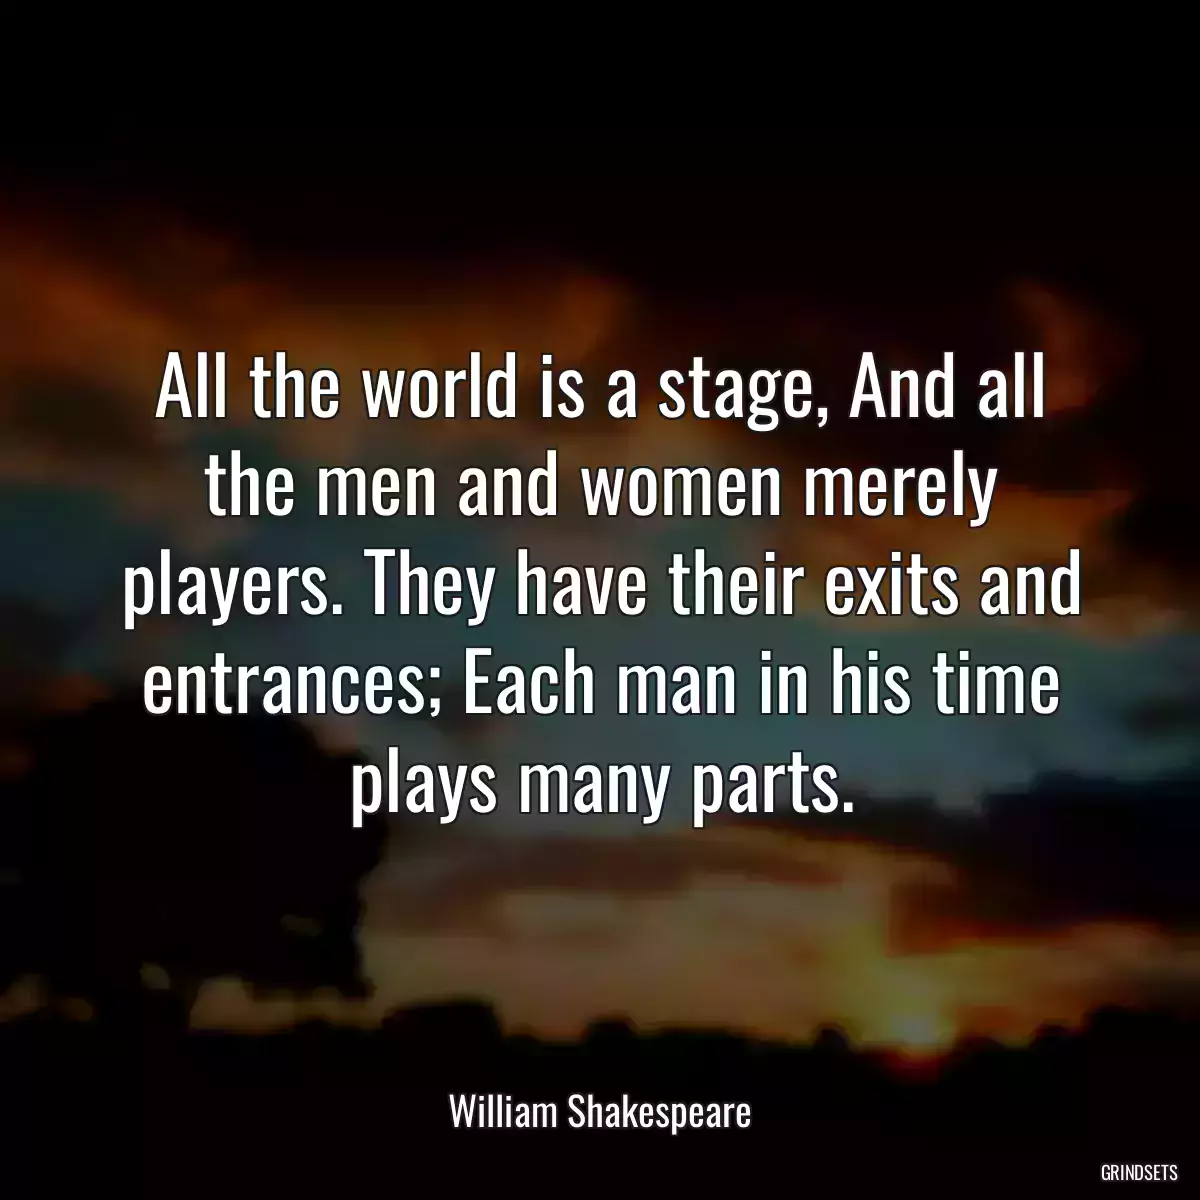 All the world is a stage, And all the men and women merely players. They have their exits and entrances; Each man in his time plays many parts.